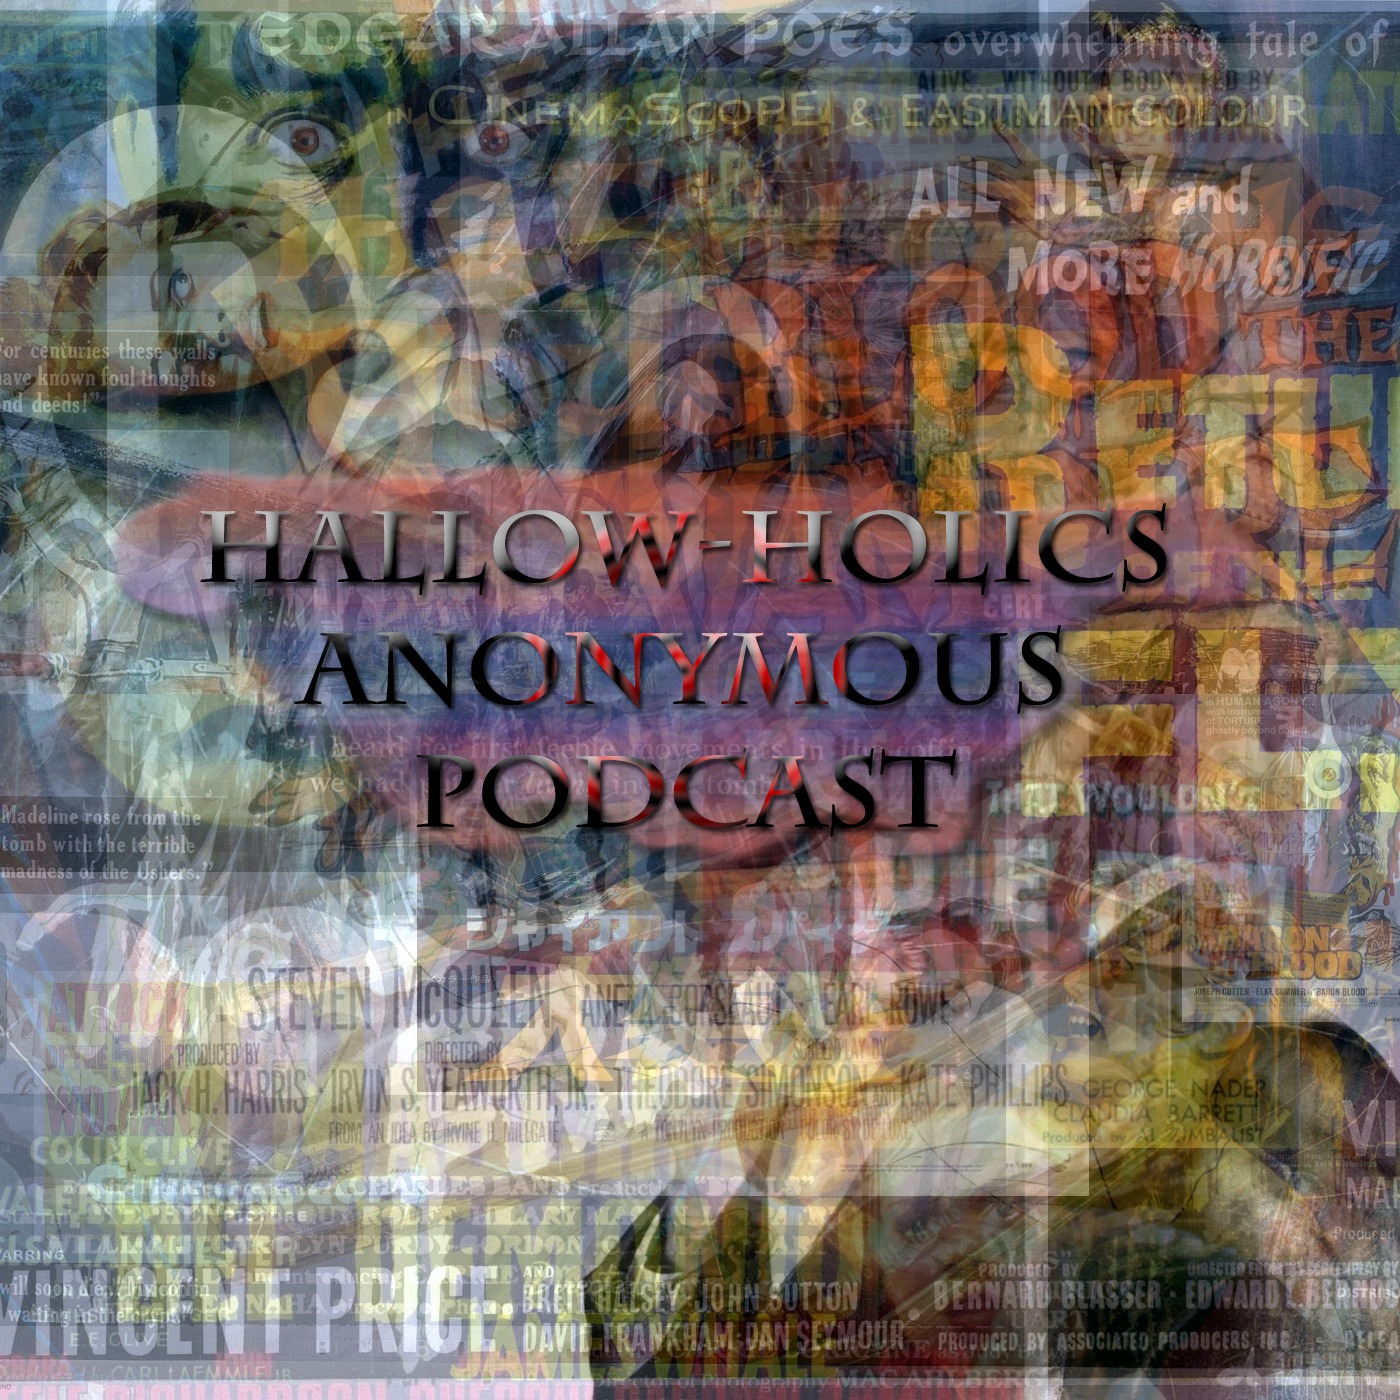 Hallow-Holics Anonymous Podcast